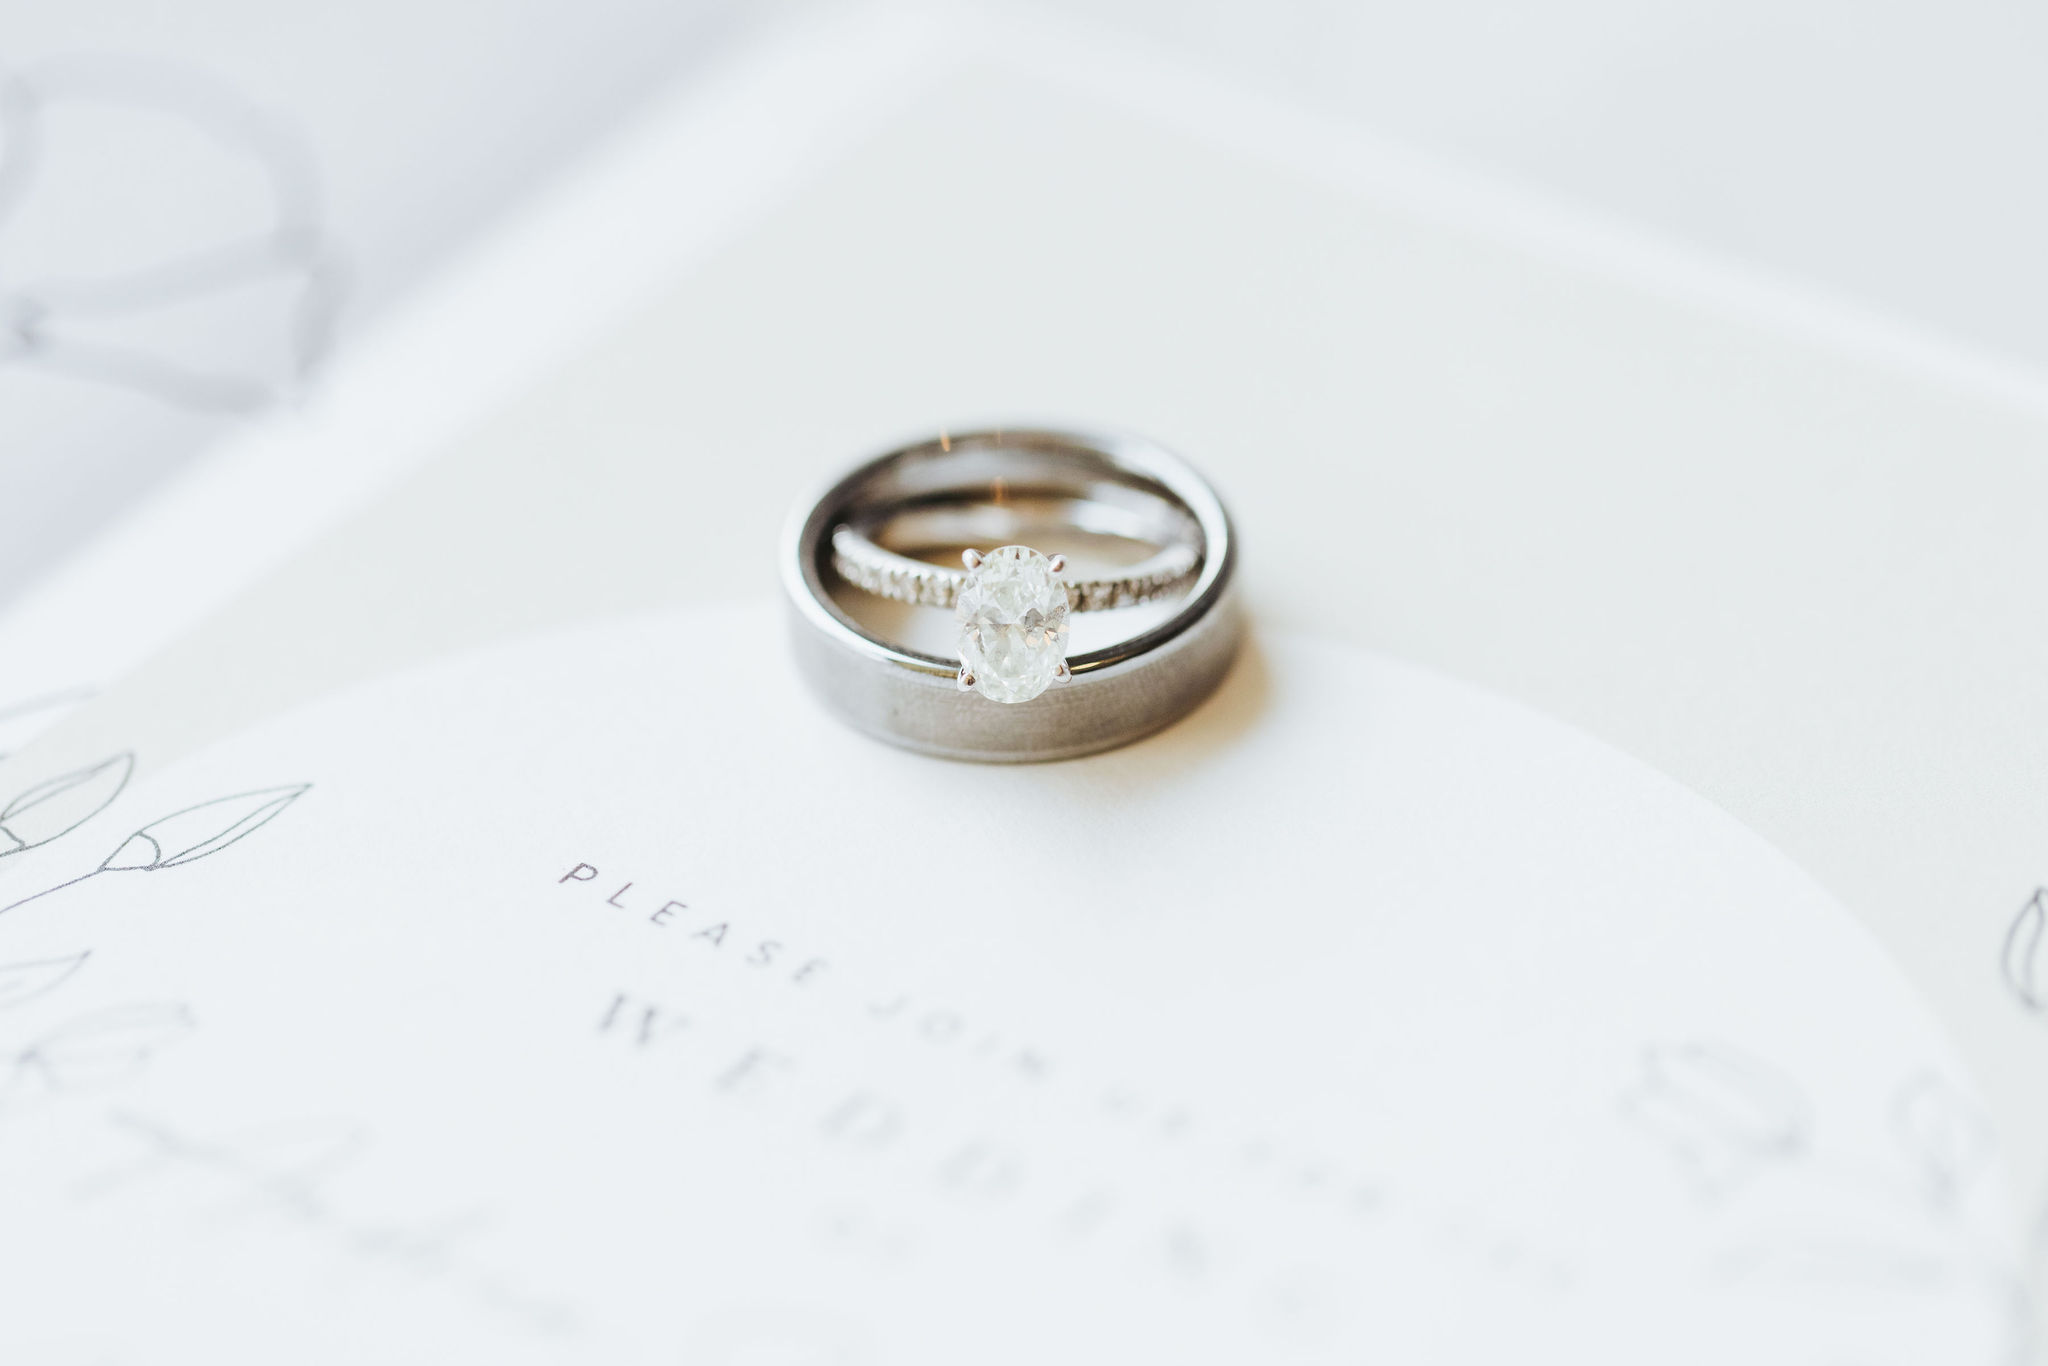 wedding invites and ring details